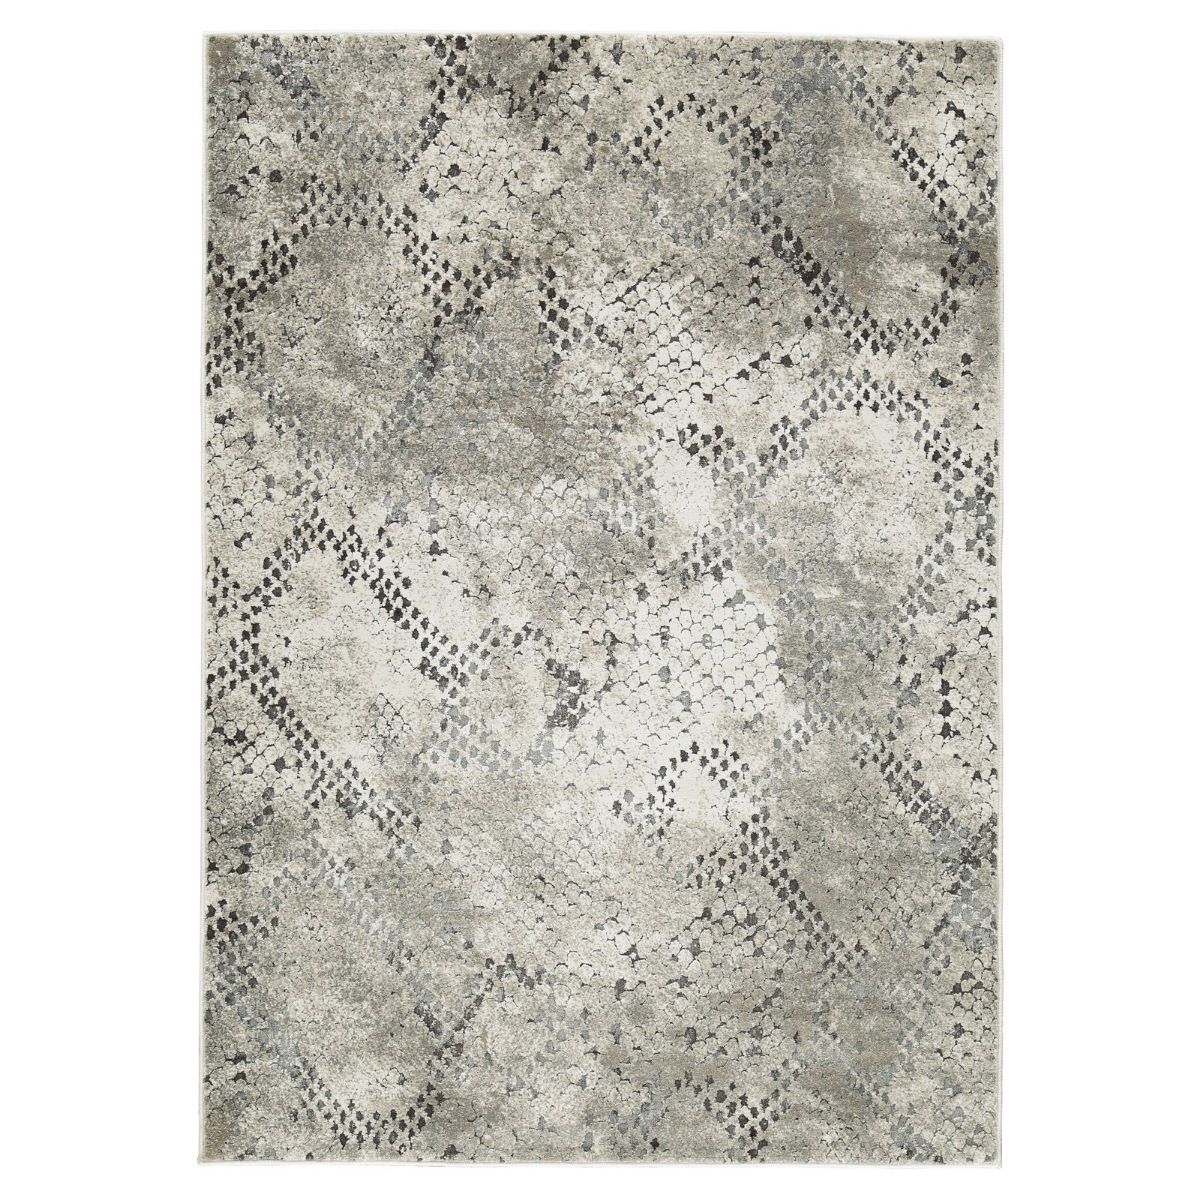 Picture of Poincilana 5’ x 7’ Rug